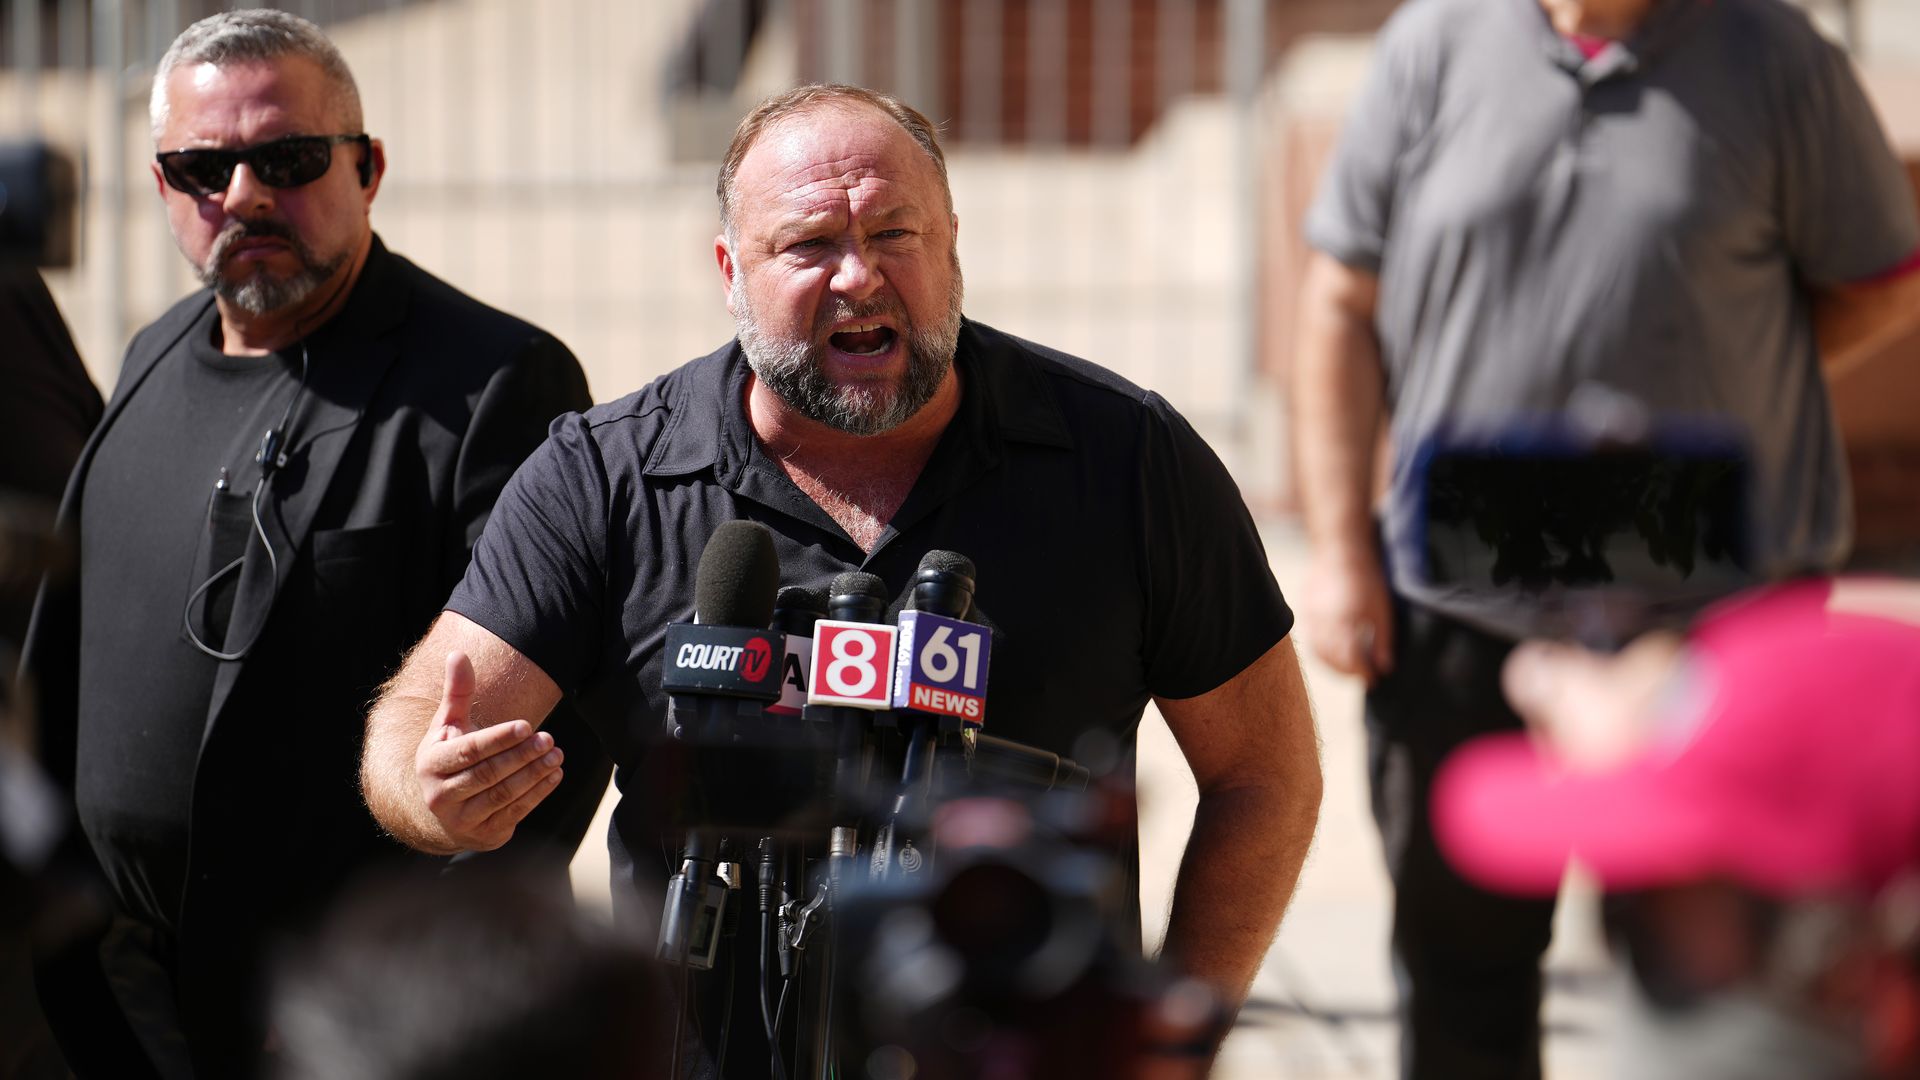 Alex Jones speaks to the media outside Waterbury Superior Court during his trial 